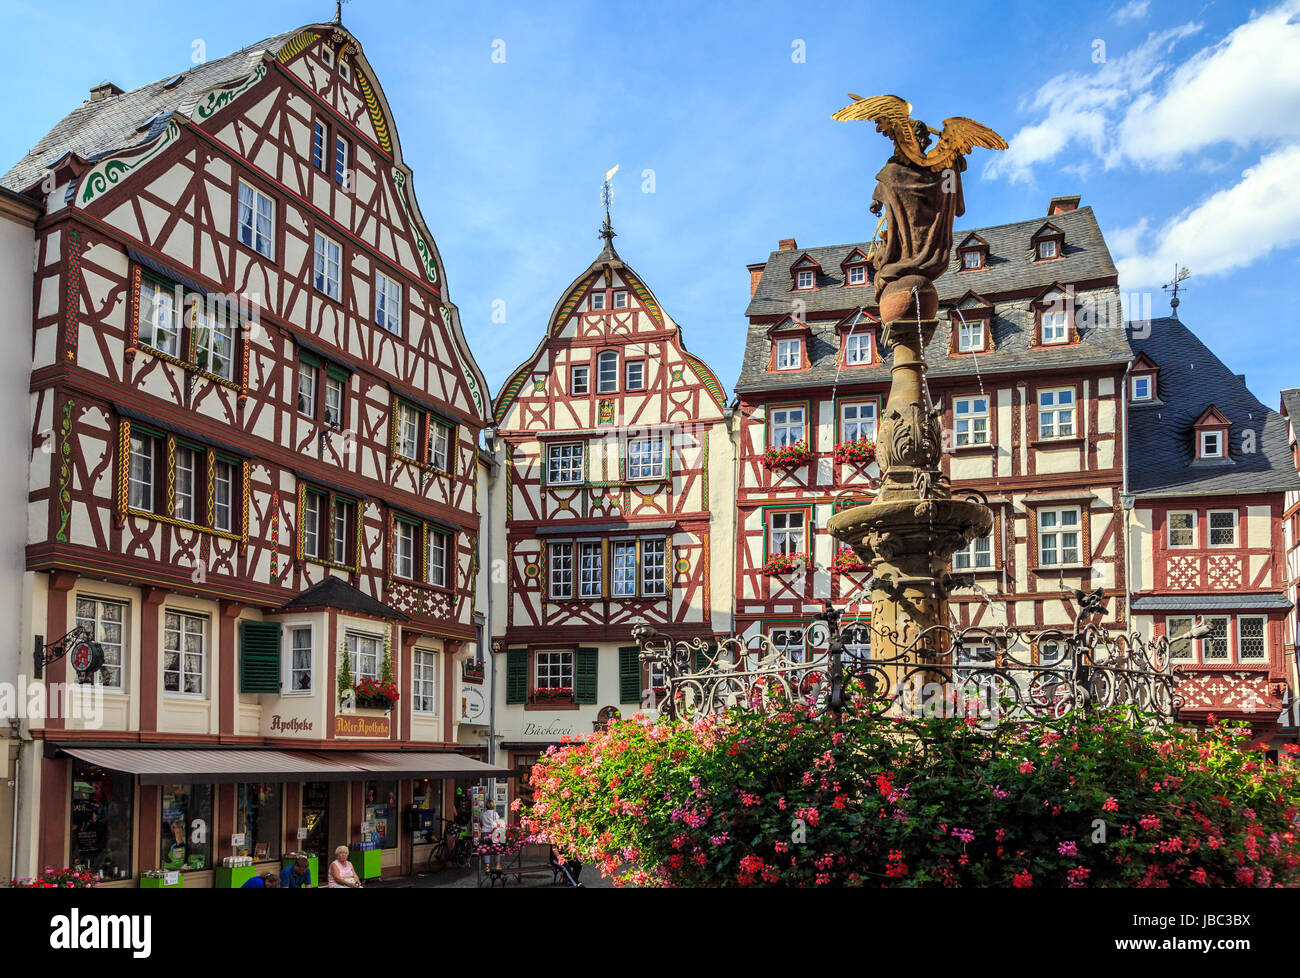 BERNKASTEL, GERMANY - AUGUST 05: Tourists stroll on August 05, 2013 in Bernkastel-Kues, Germany. According to its Tourism Office, the town is annually visited by 1.5m tourists. Region is famous for wines. Stock Photo